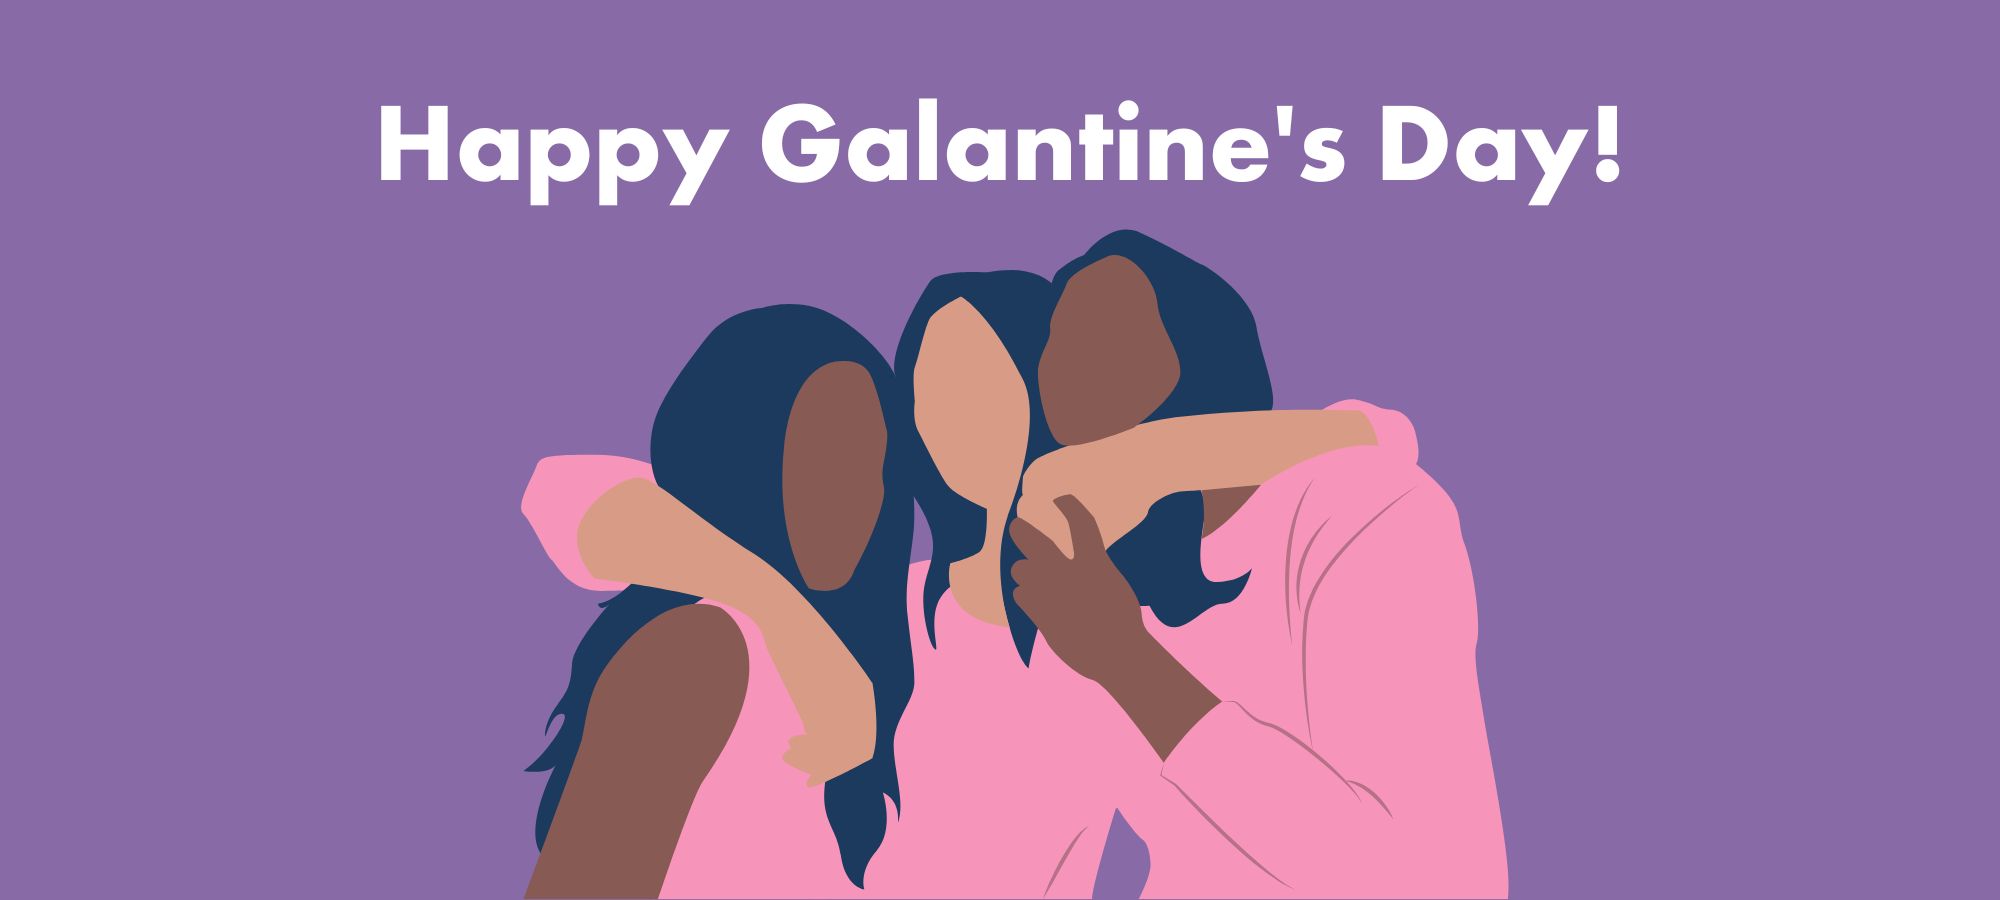 What is Galantine's Day